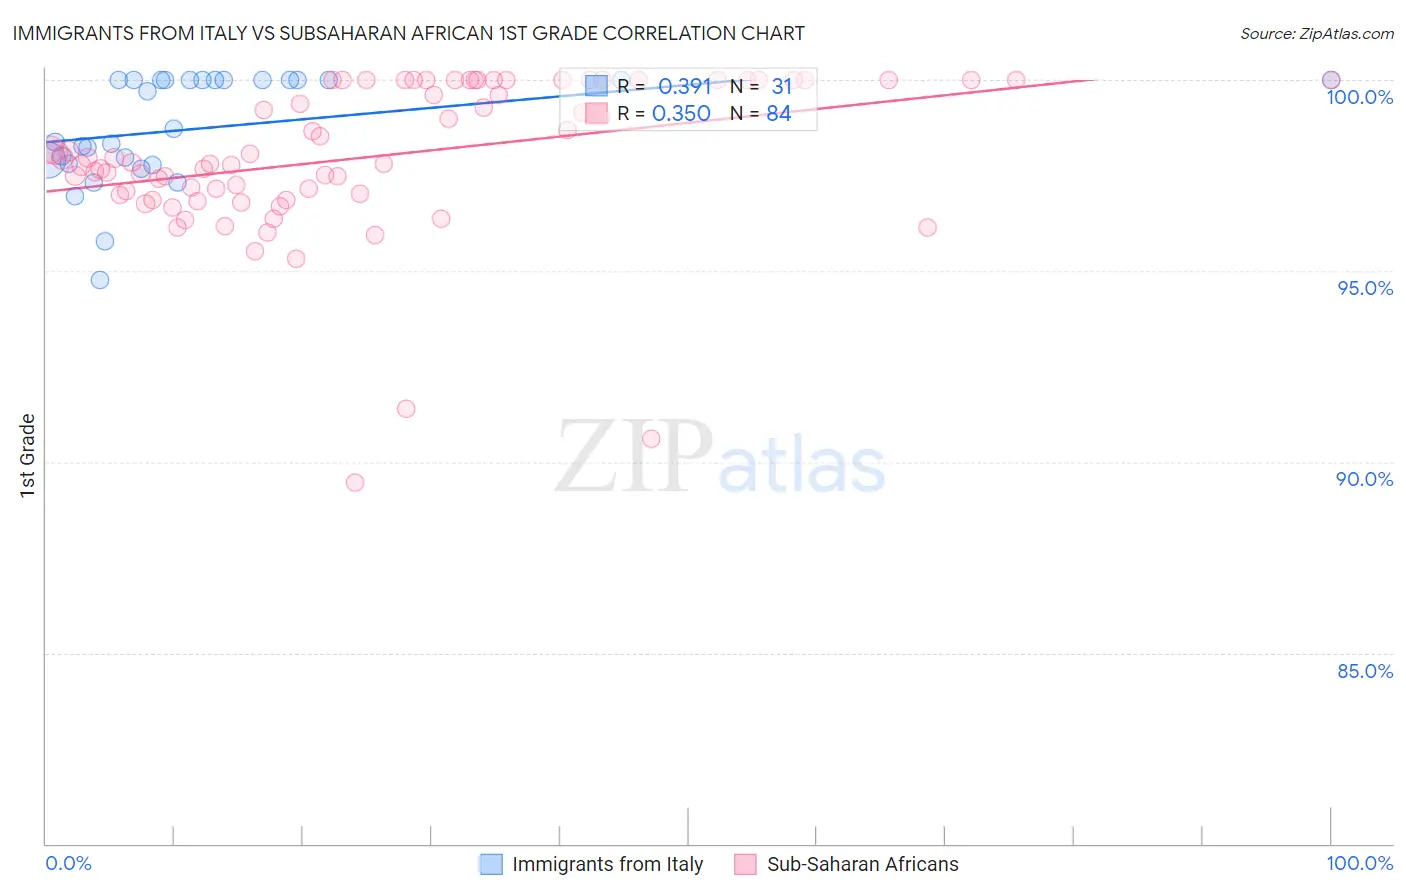 Immigrants from Italy vs Subsaharan African 1st Grade